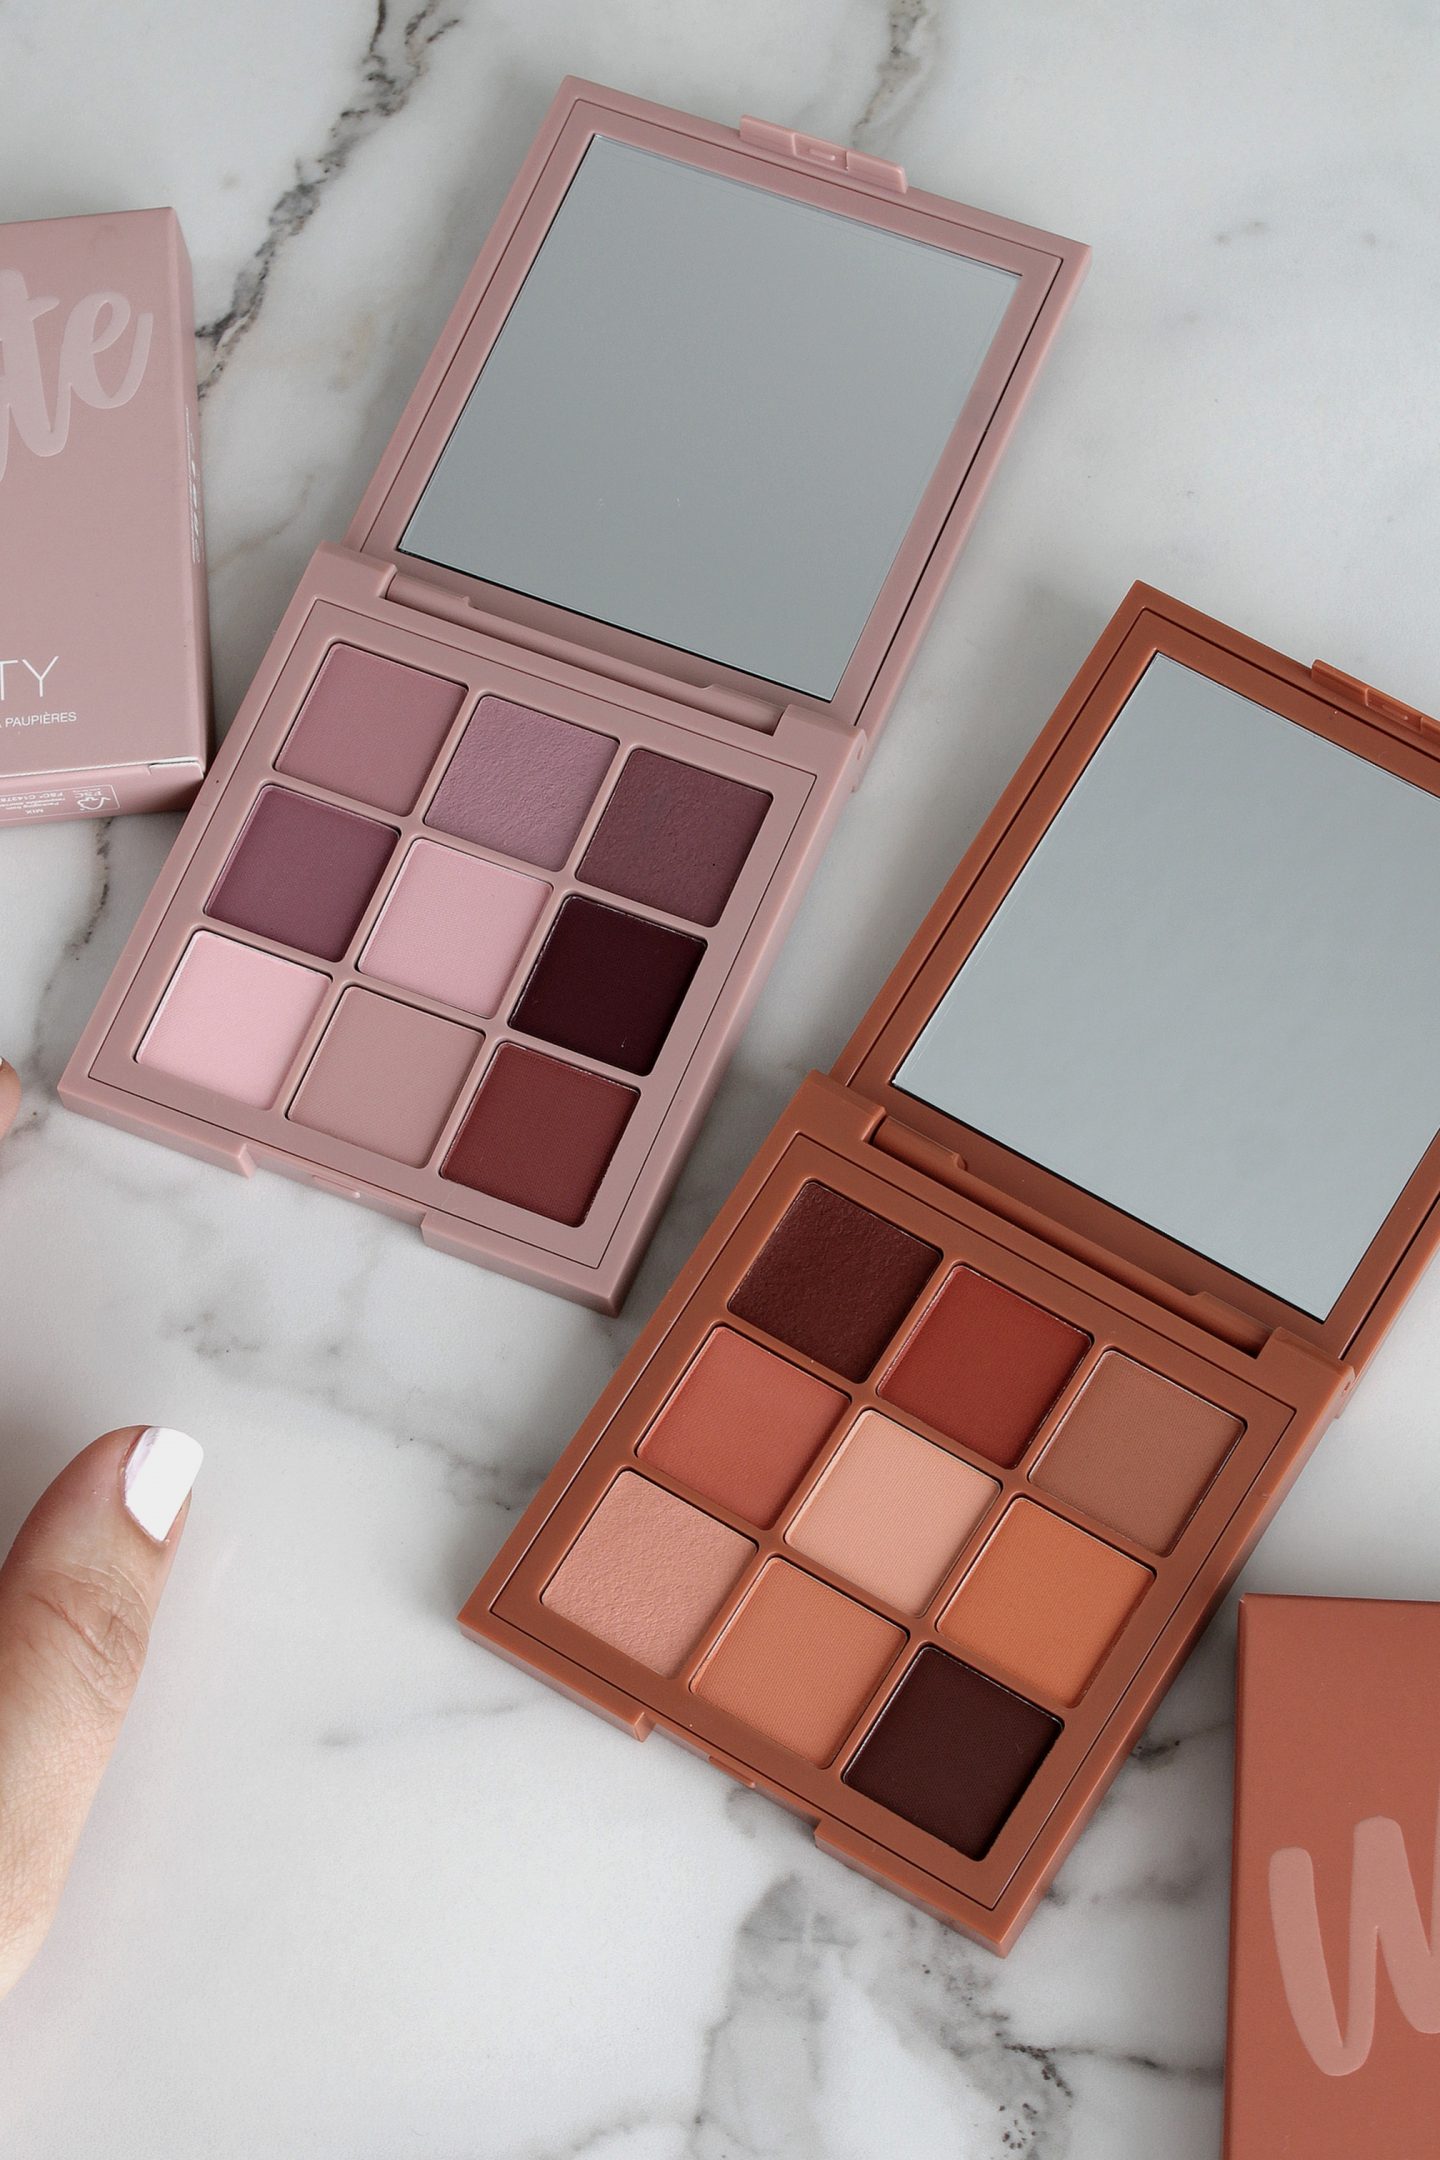 Huda Beauty | Matte Obsessions Eyeshadow Palettes